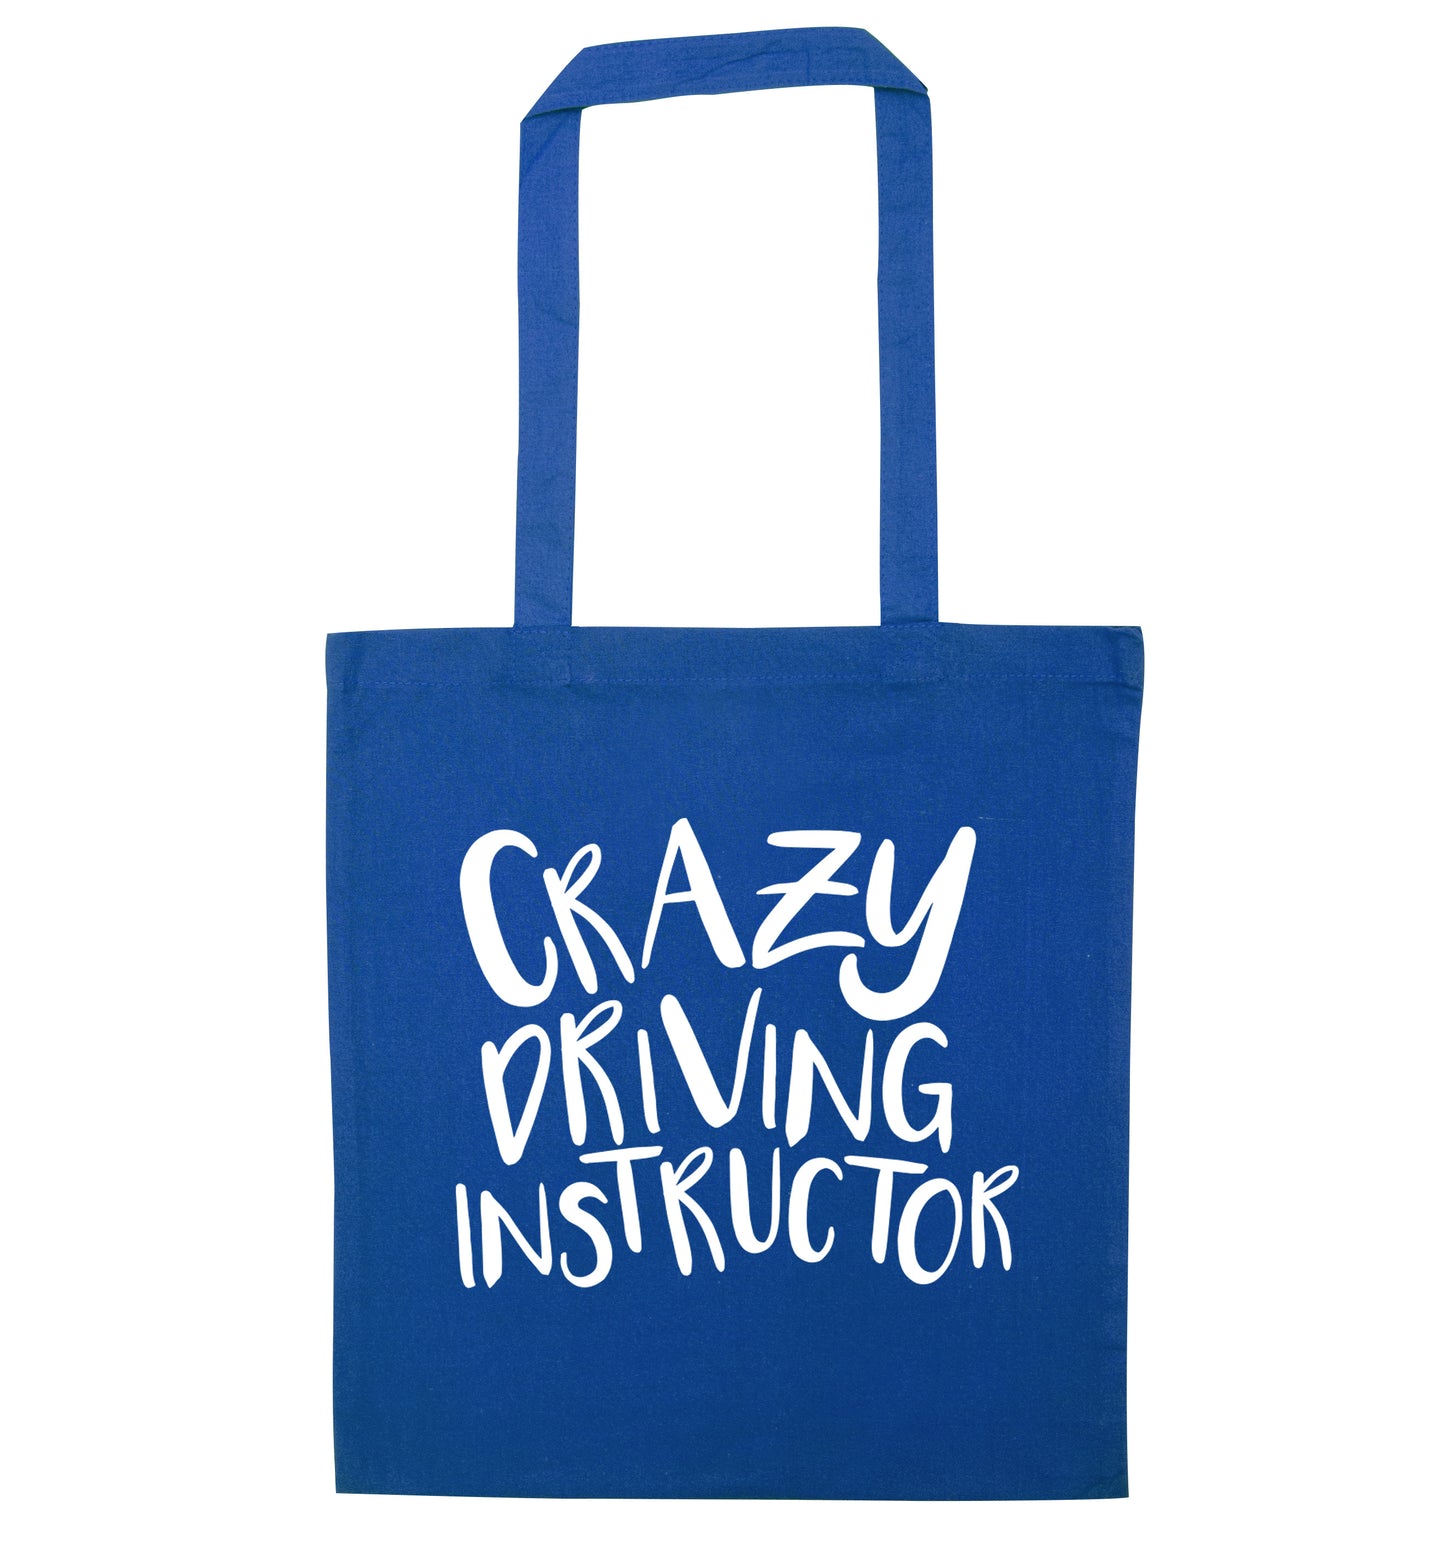 Crazy driving instructor blue tote bag